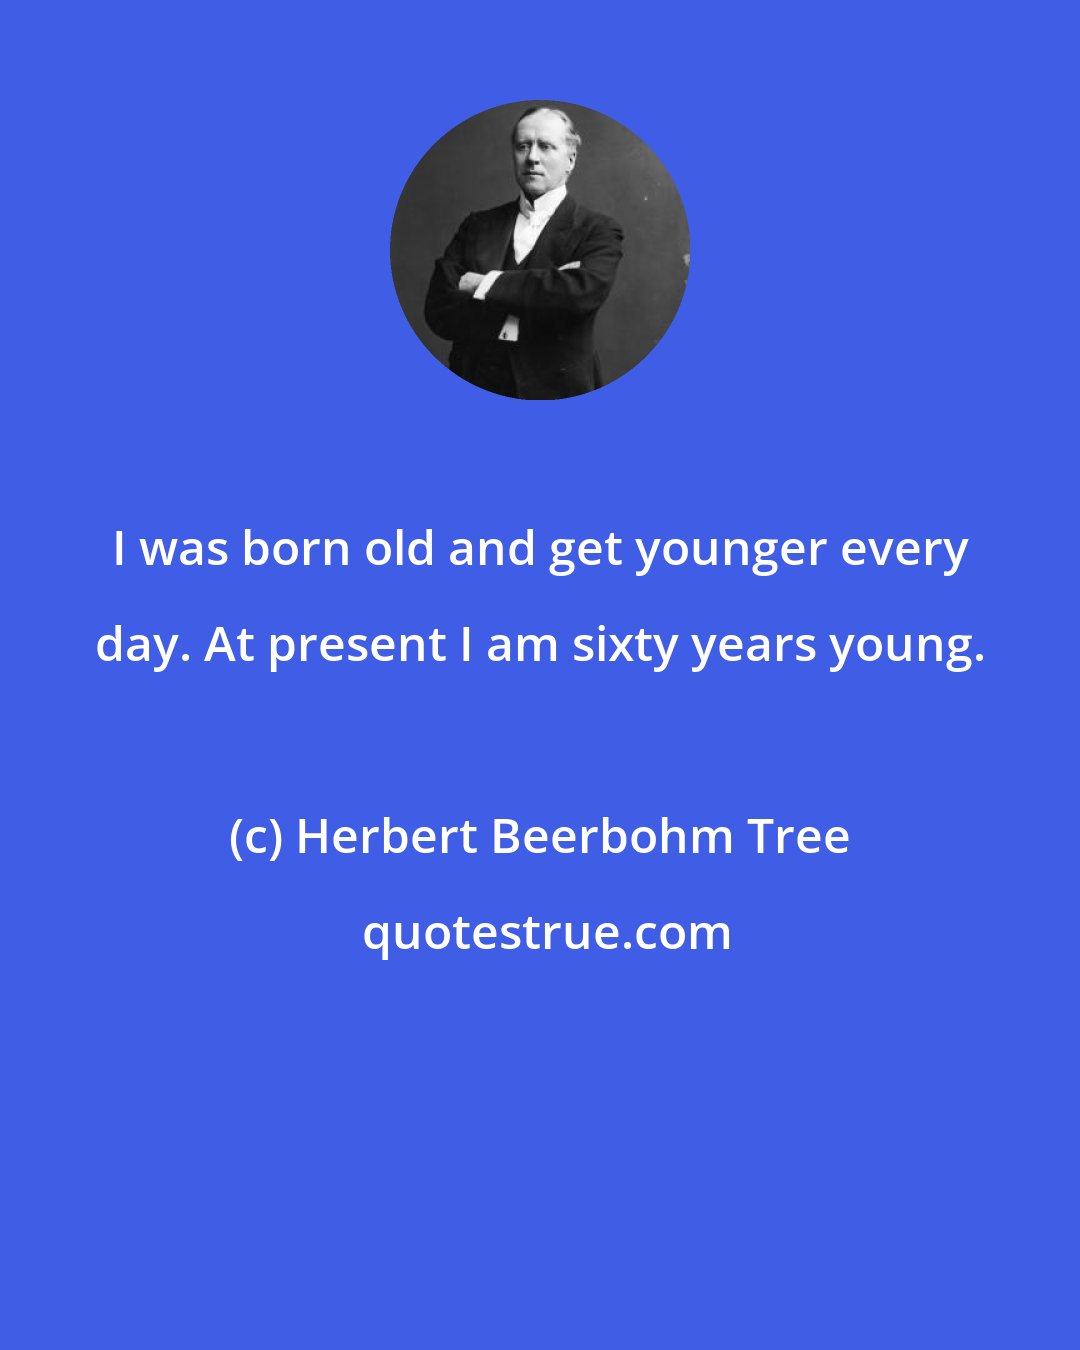 Herbert Beerbohm Tree: I was born old and get younger every day. At present I am sixty years young.